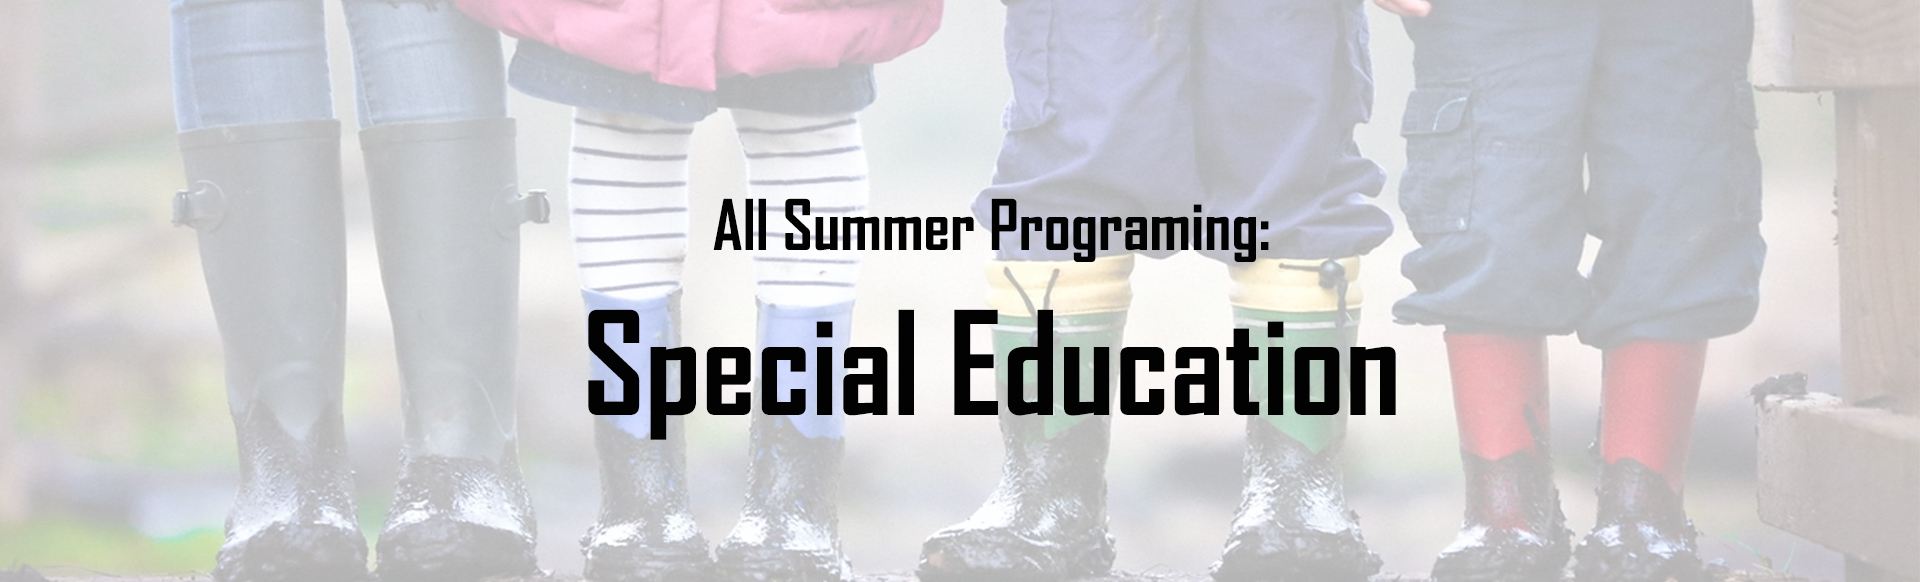 All Summer Programming for Special Education